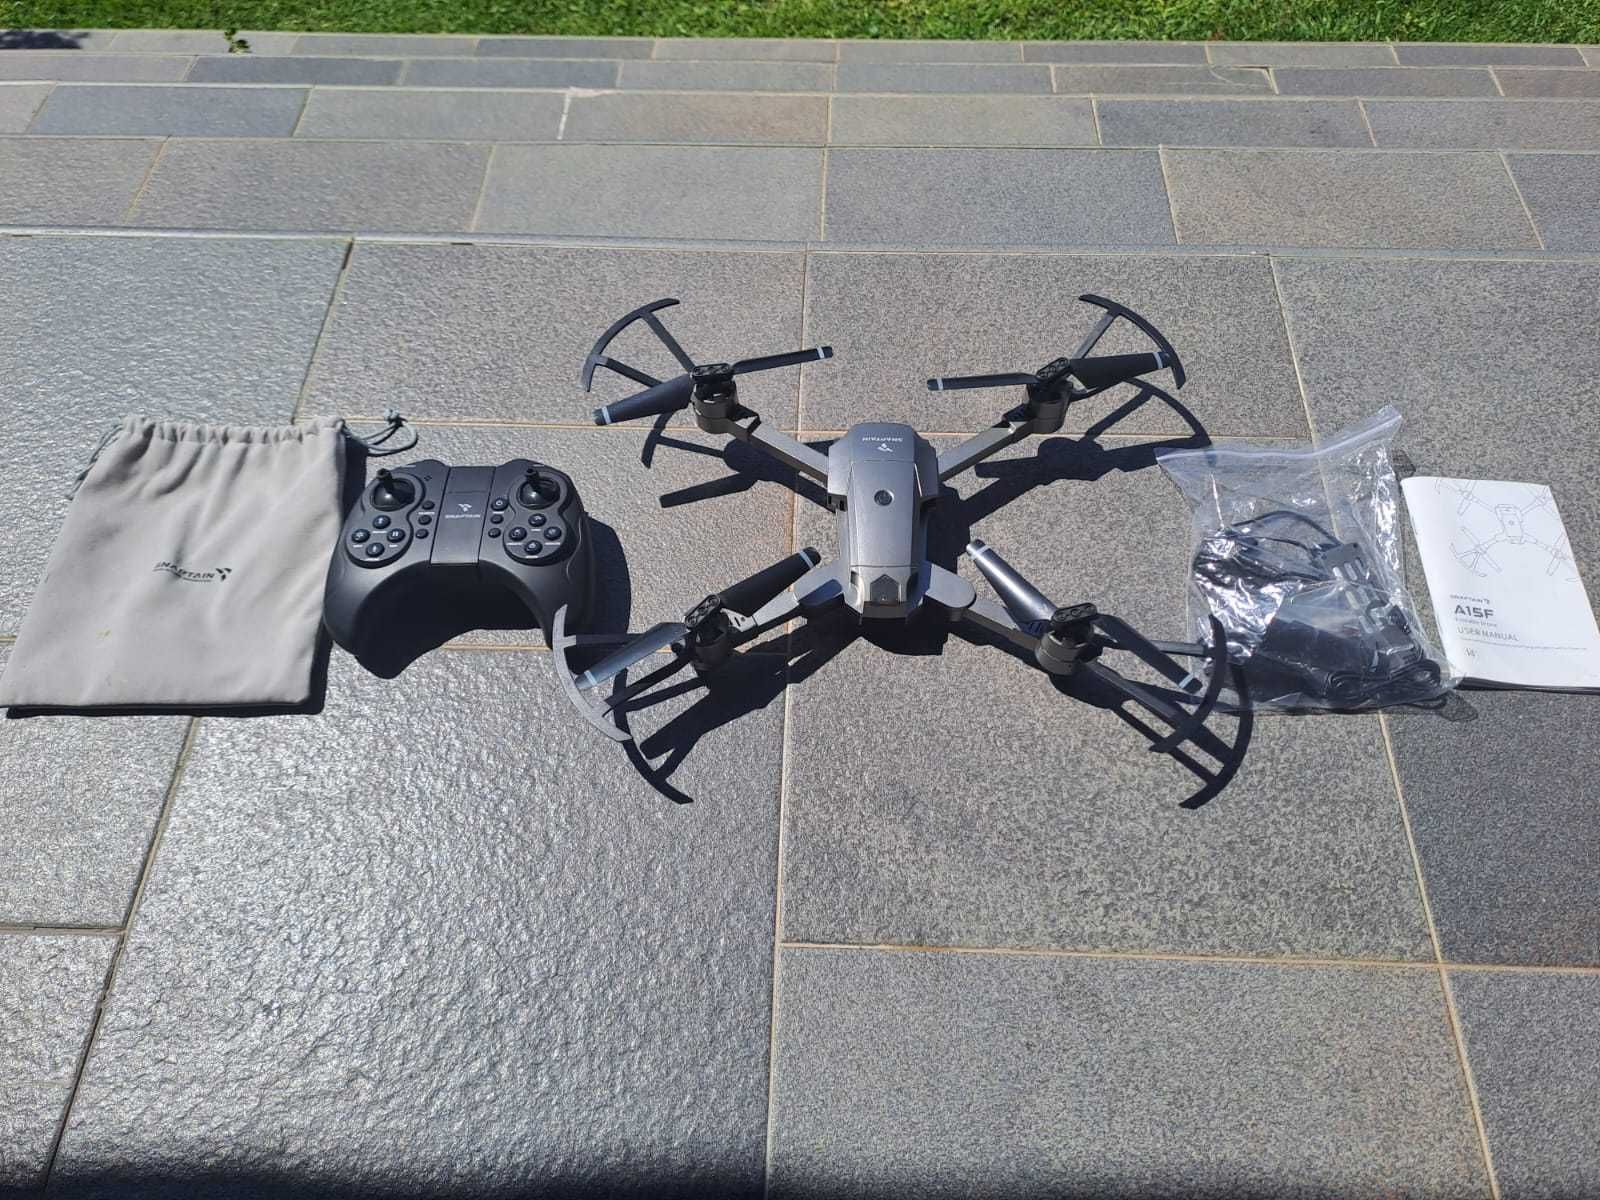 Drone Snaptain A15F(Foldable Drone)